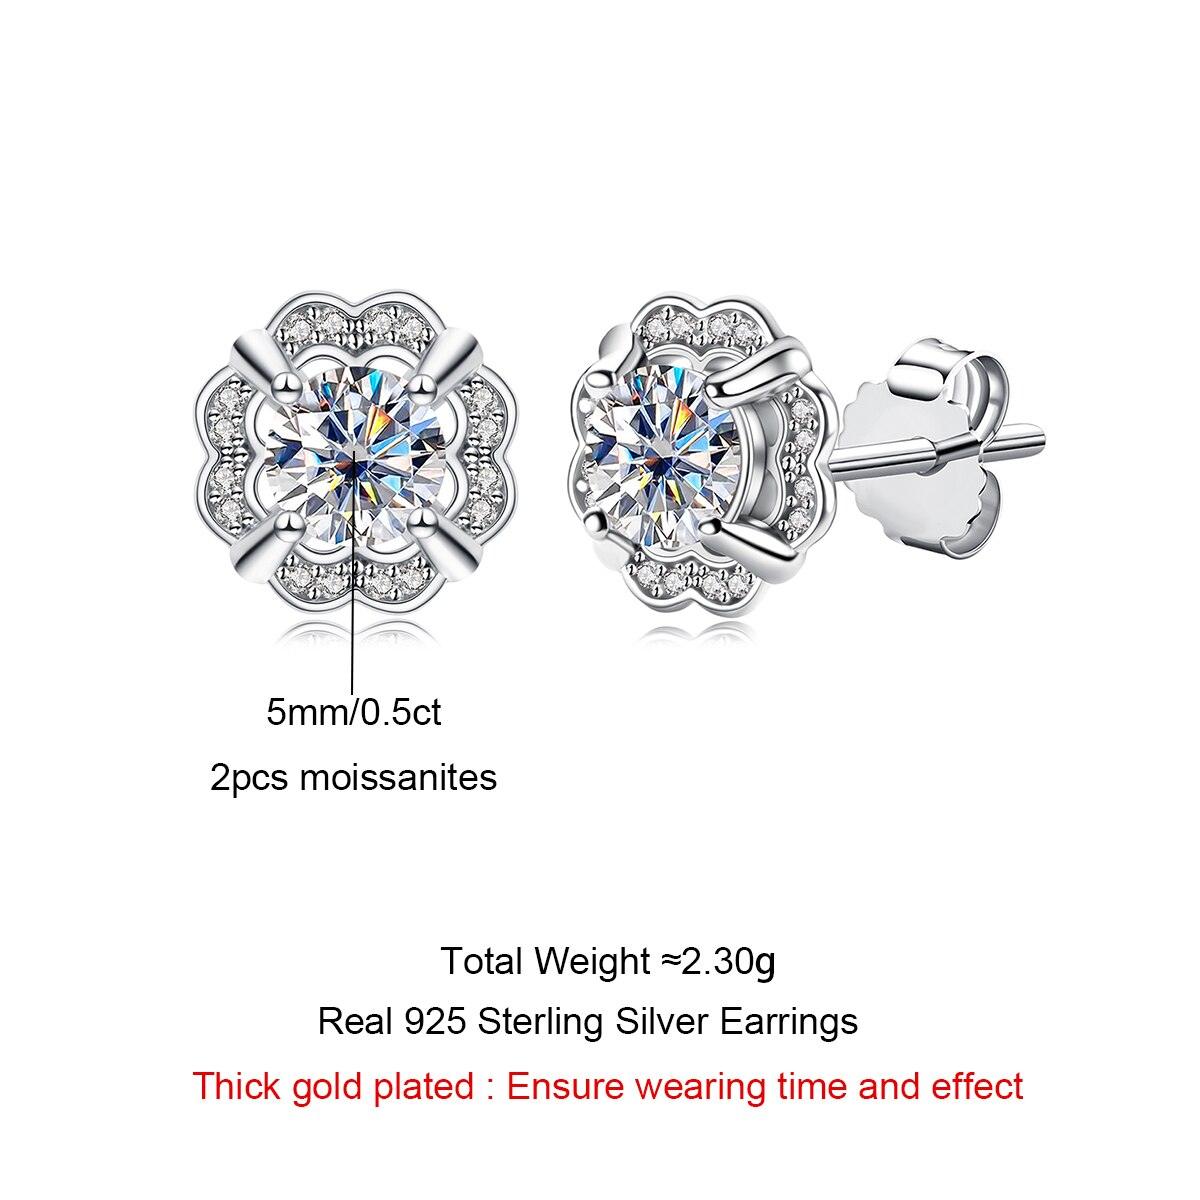 1 Carat Total D Color ♥︎ High Quality Moissanite Diamonds ♥︎ 925 Sterling Silver Charm Flower Stud Earrings - The Jewellery Supermarket